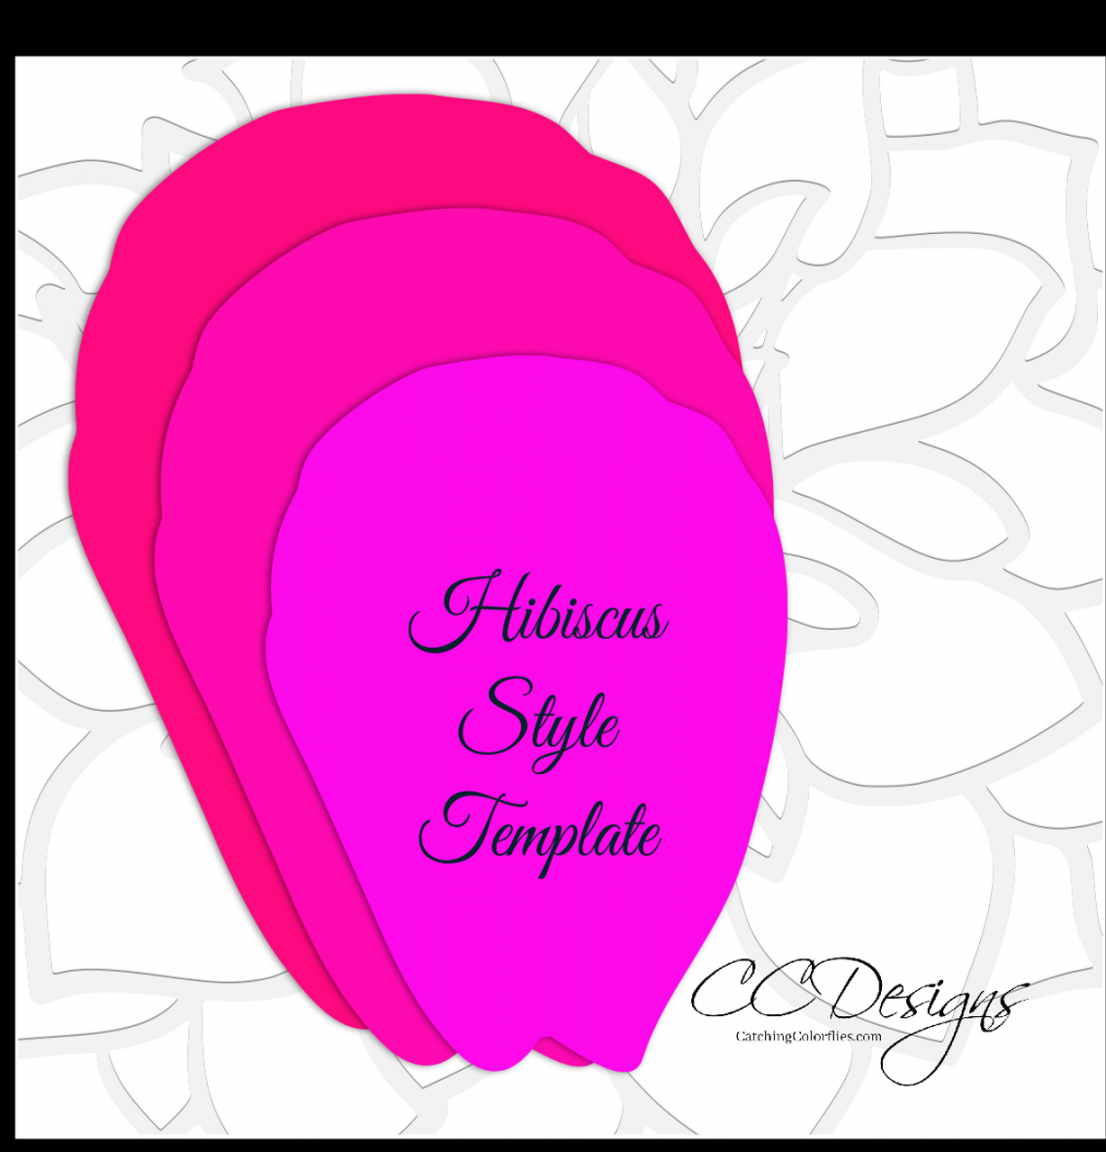 Giant Paper Flower Hibiscus Templates - FREE Printables - Free Printable Hibiscus Flower Template